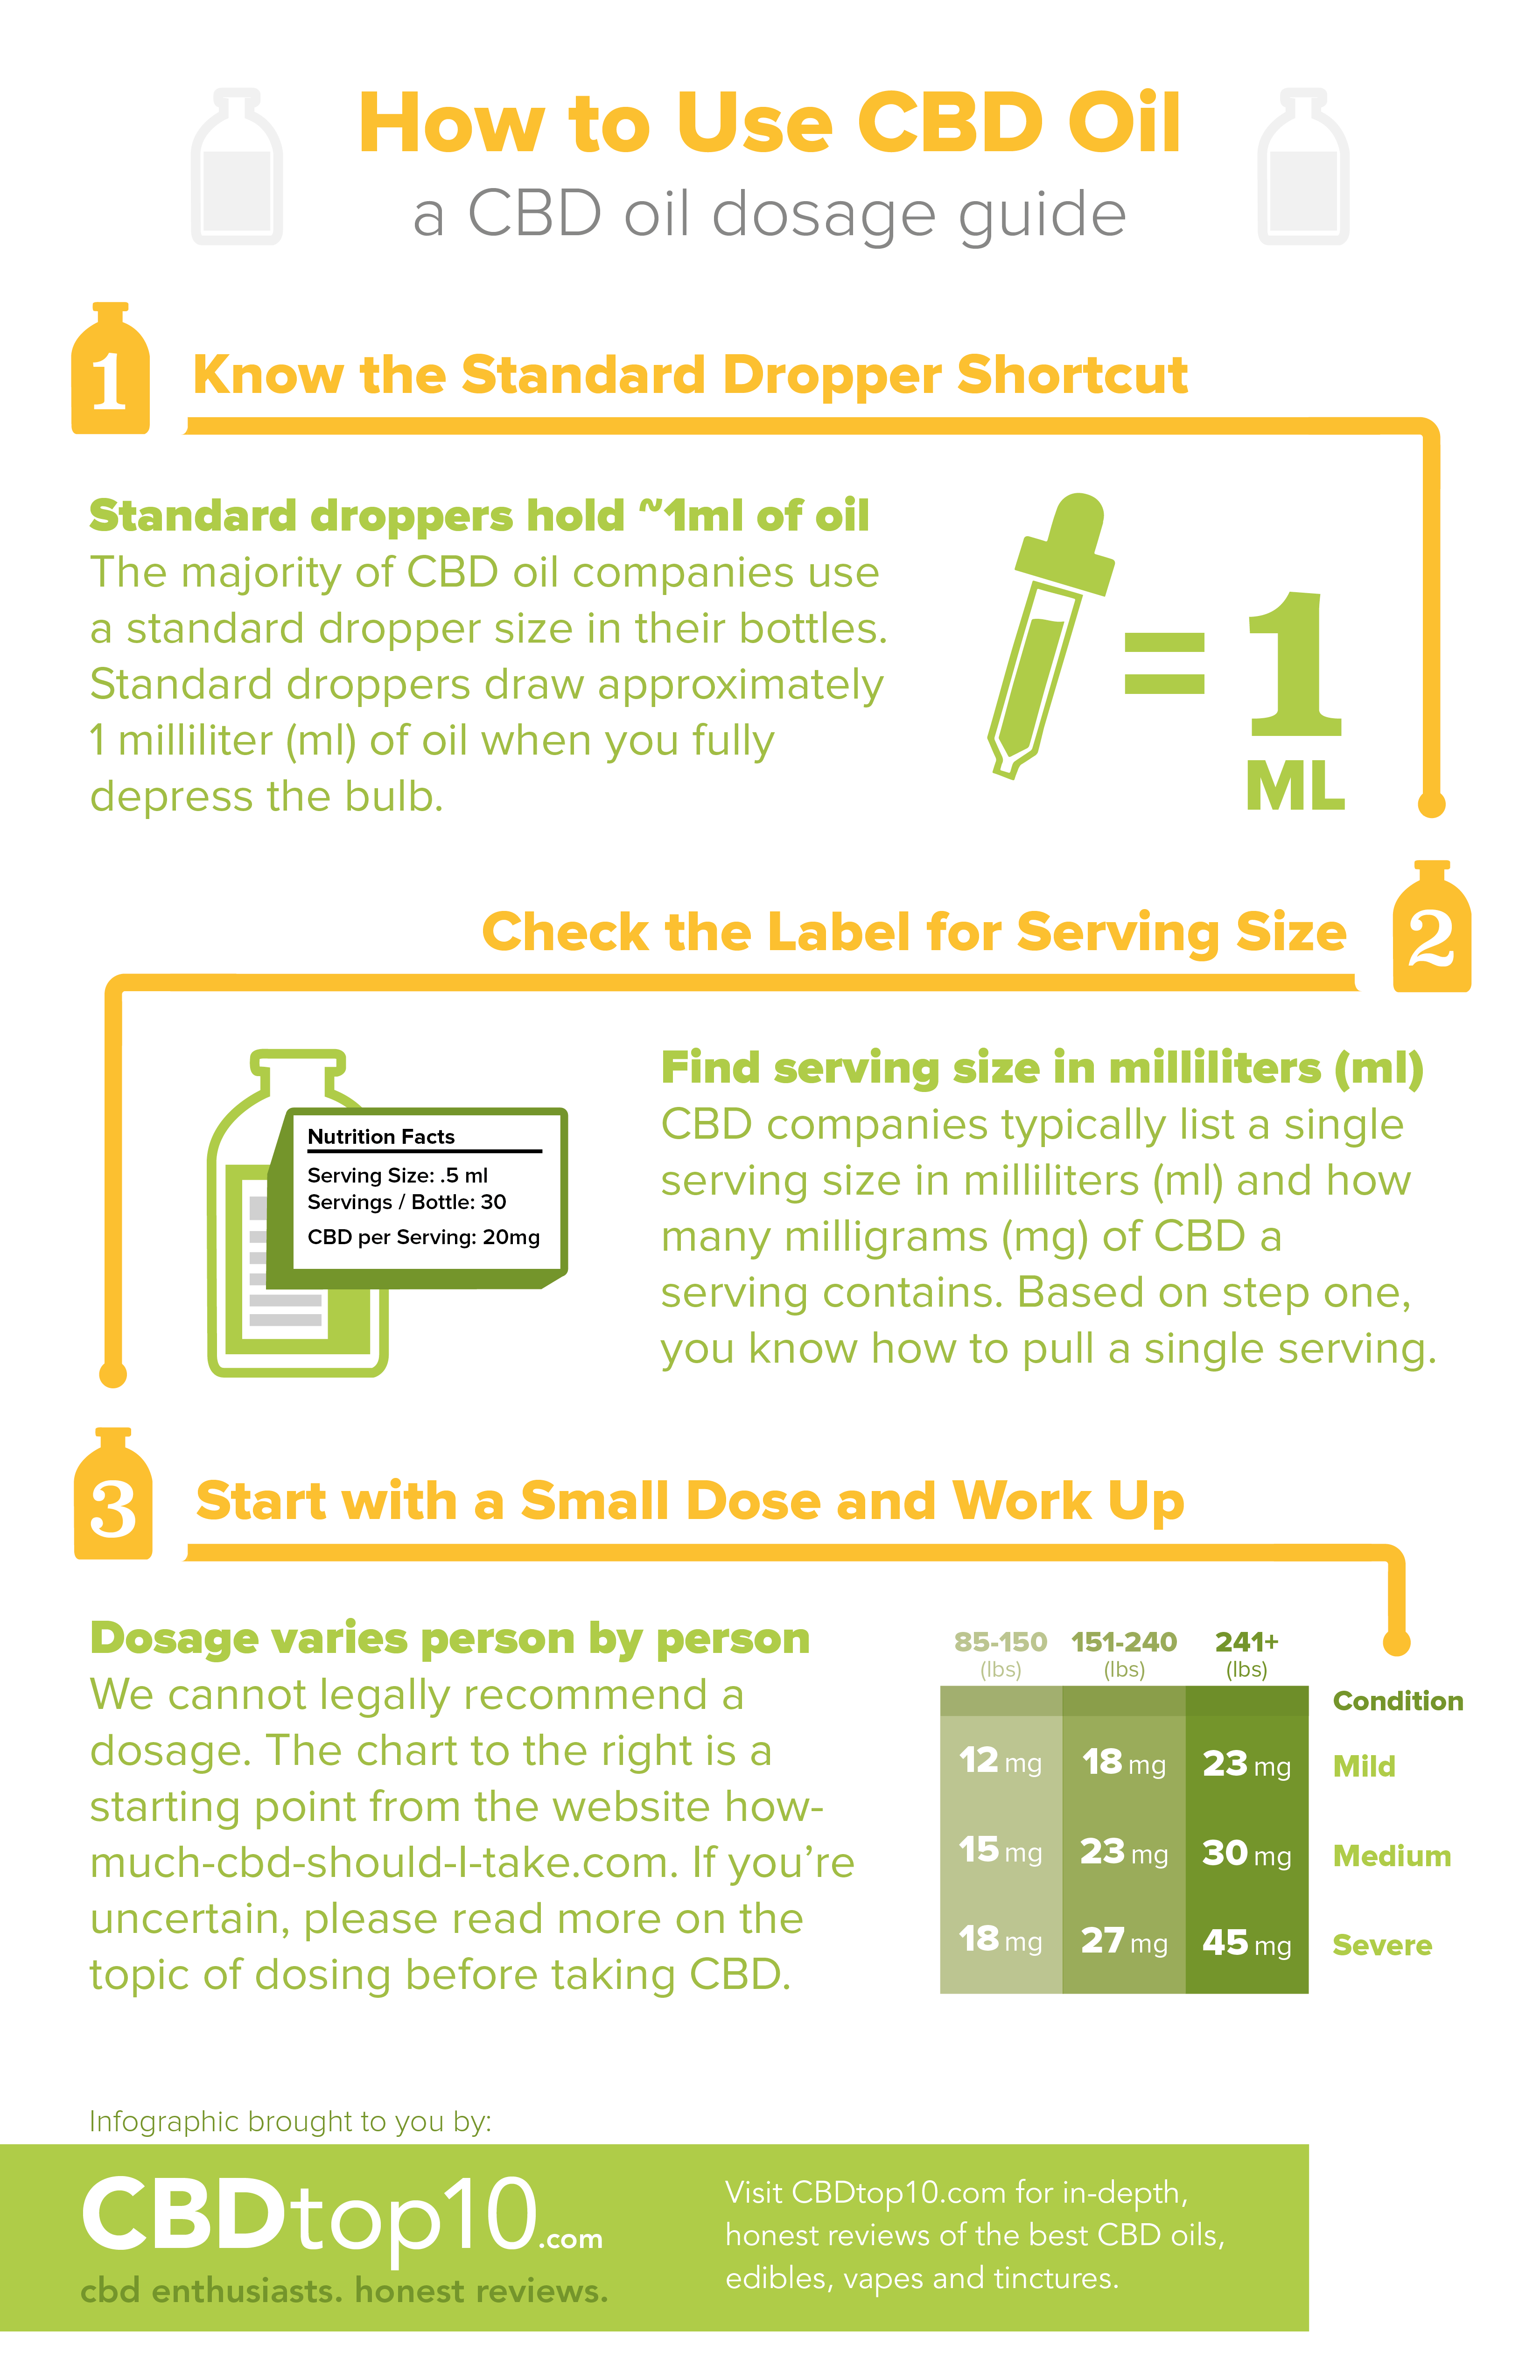 How to Use CBD Oil Infographic